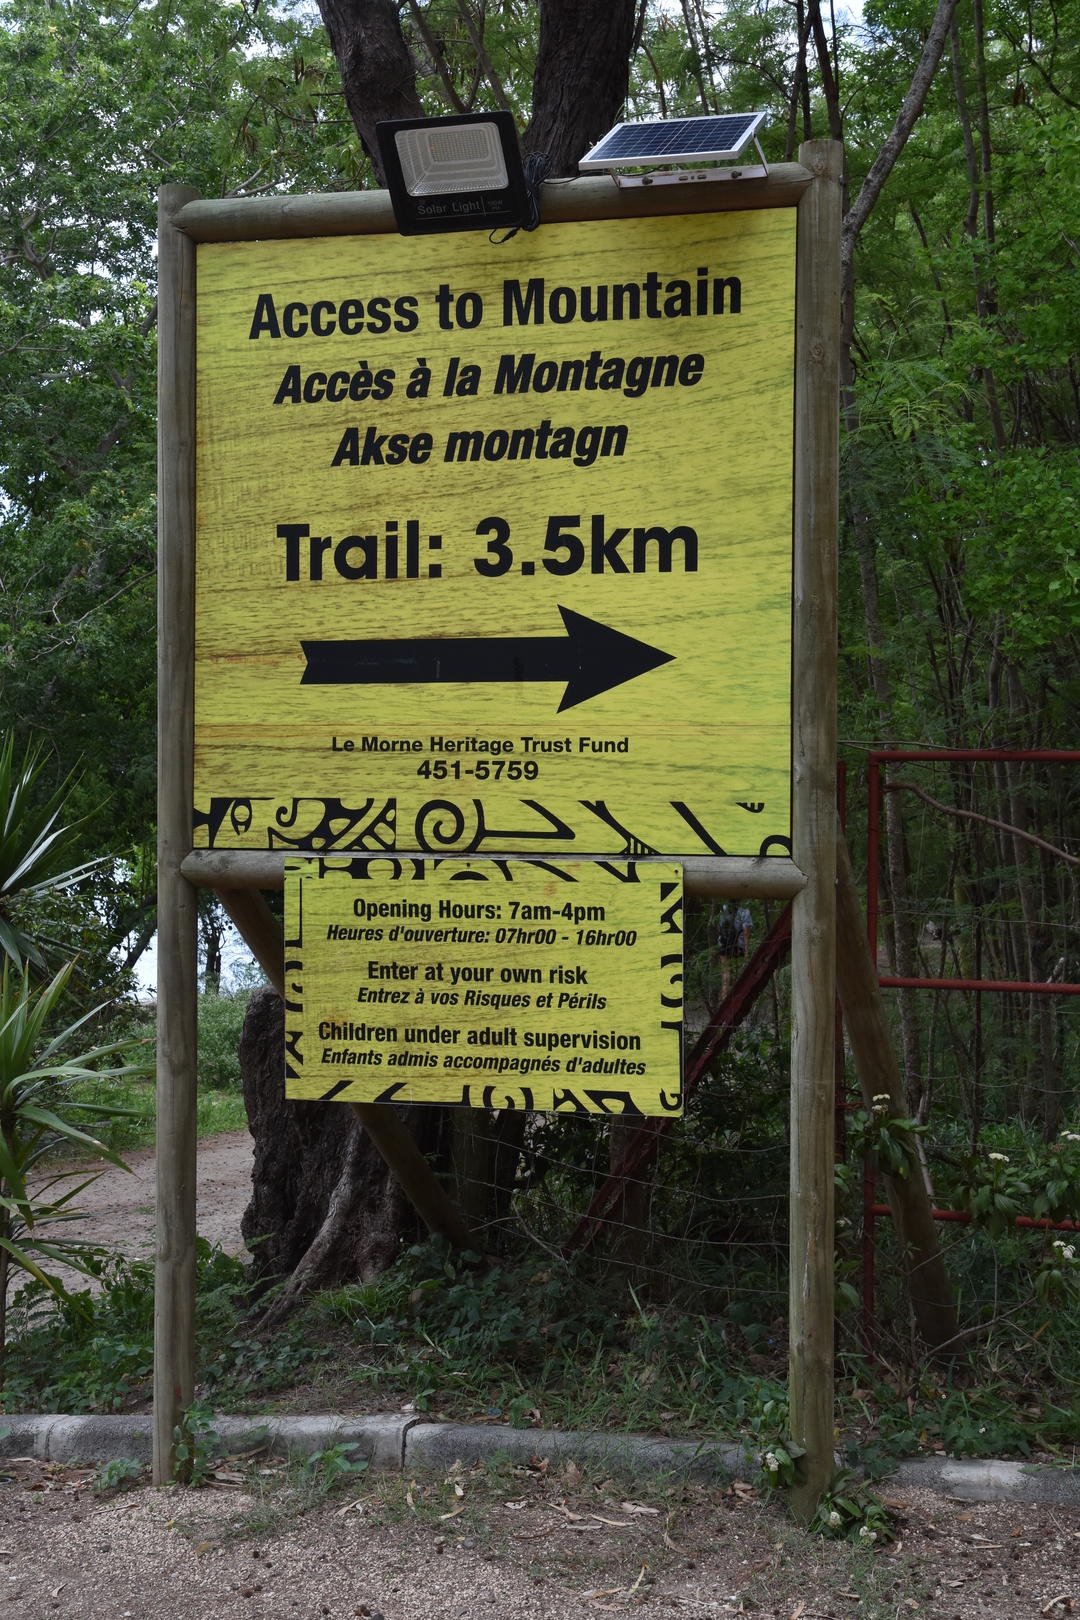 Le Morne Brabant :: the trail starting point, note the Creole language